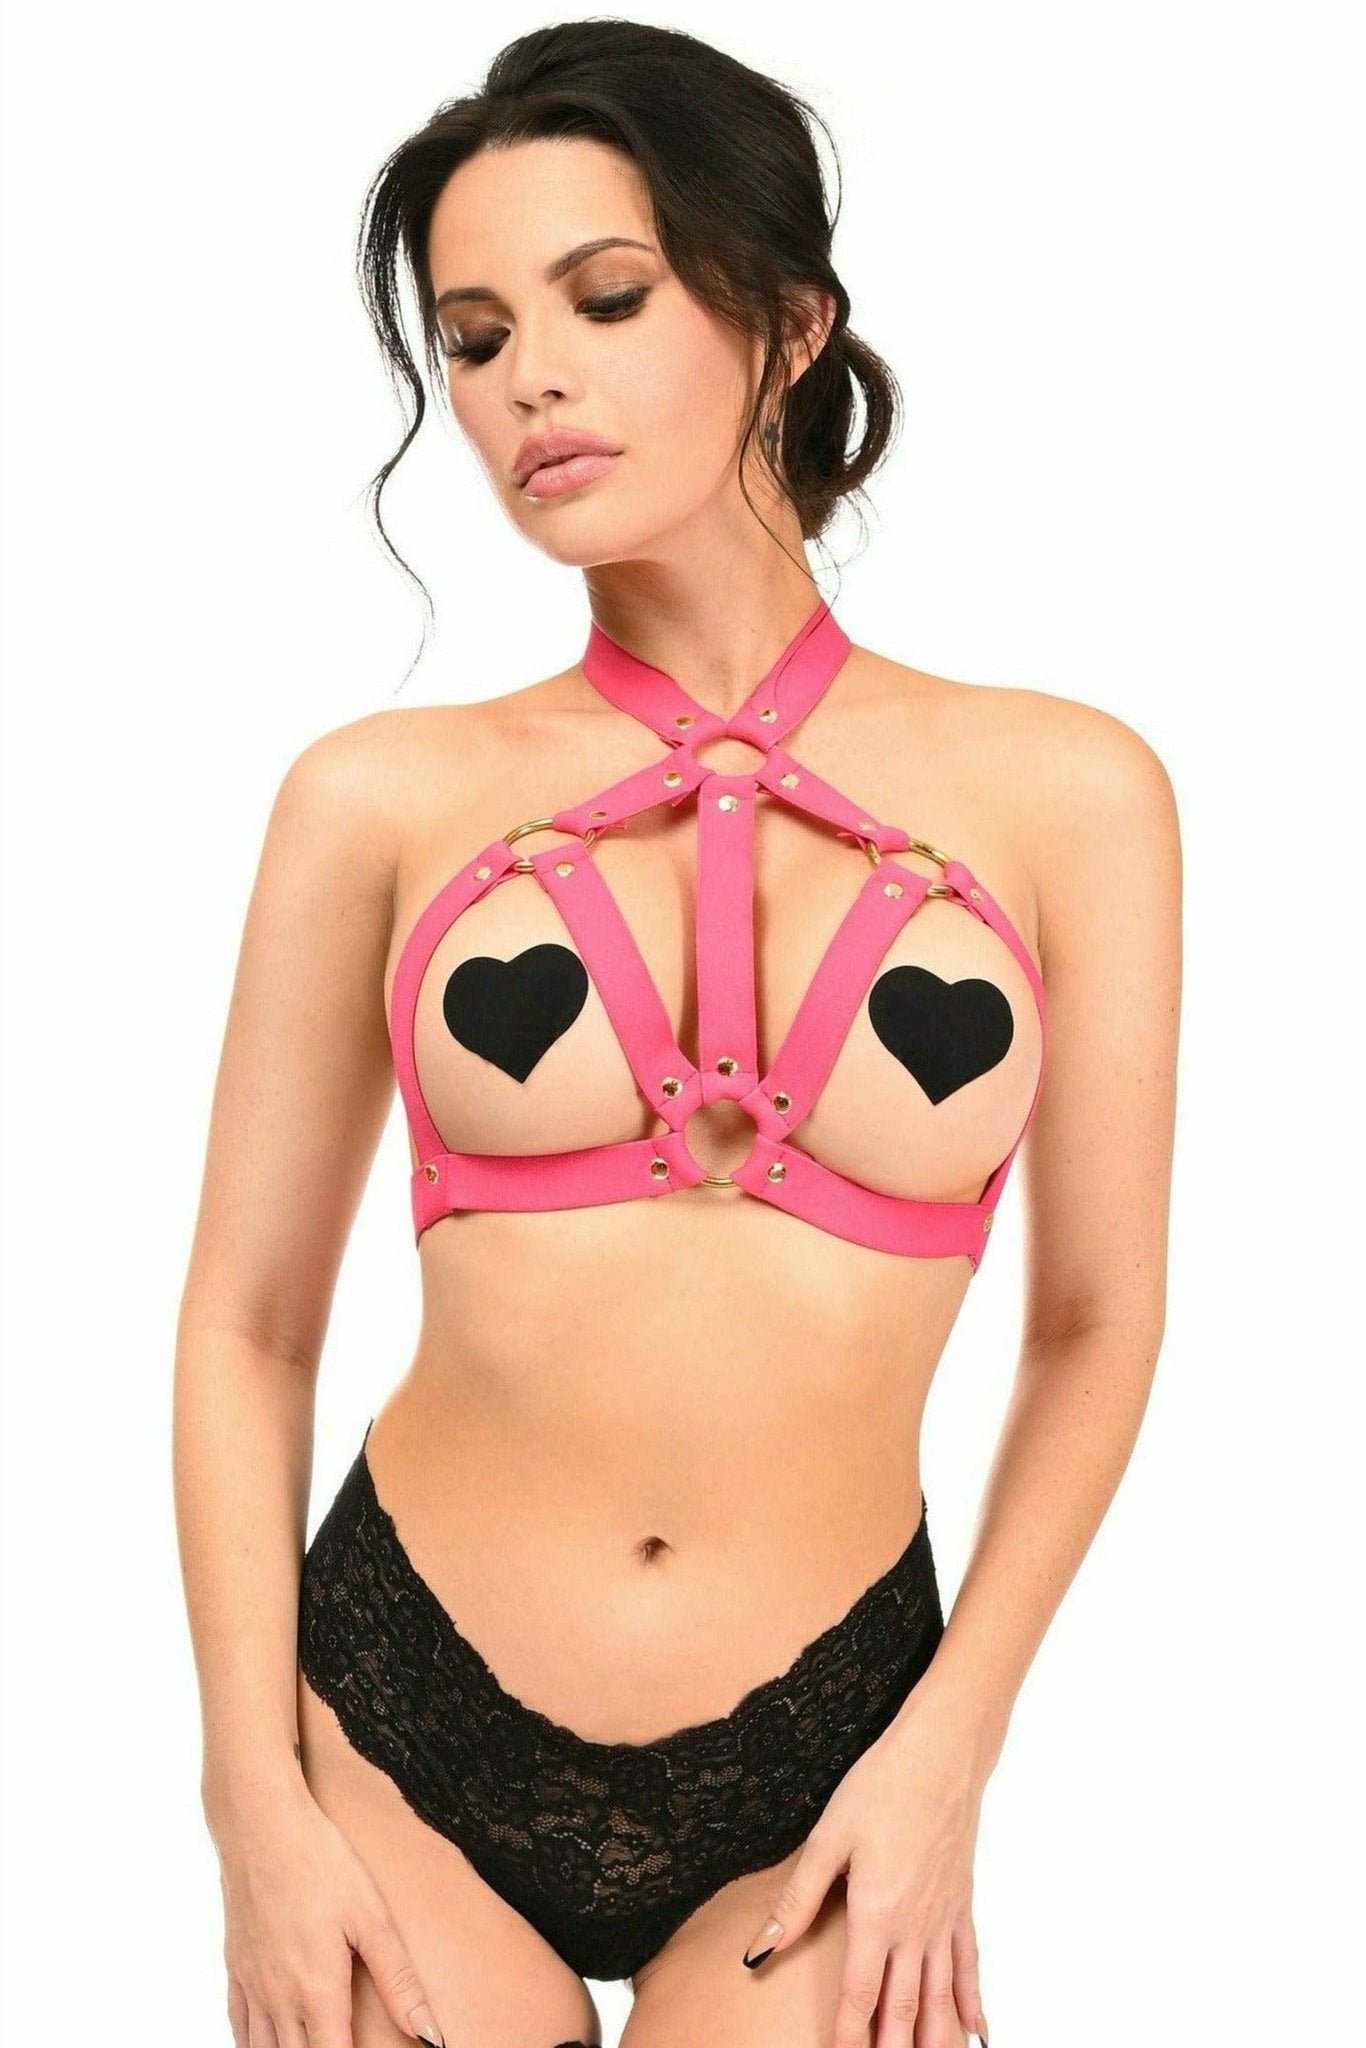 Hot Pink Stretchy Body Harness with Gold Hardware Musotica.com